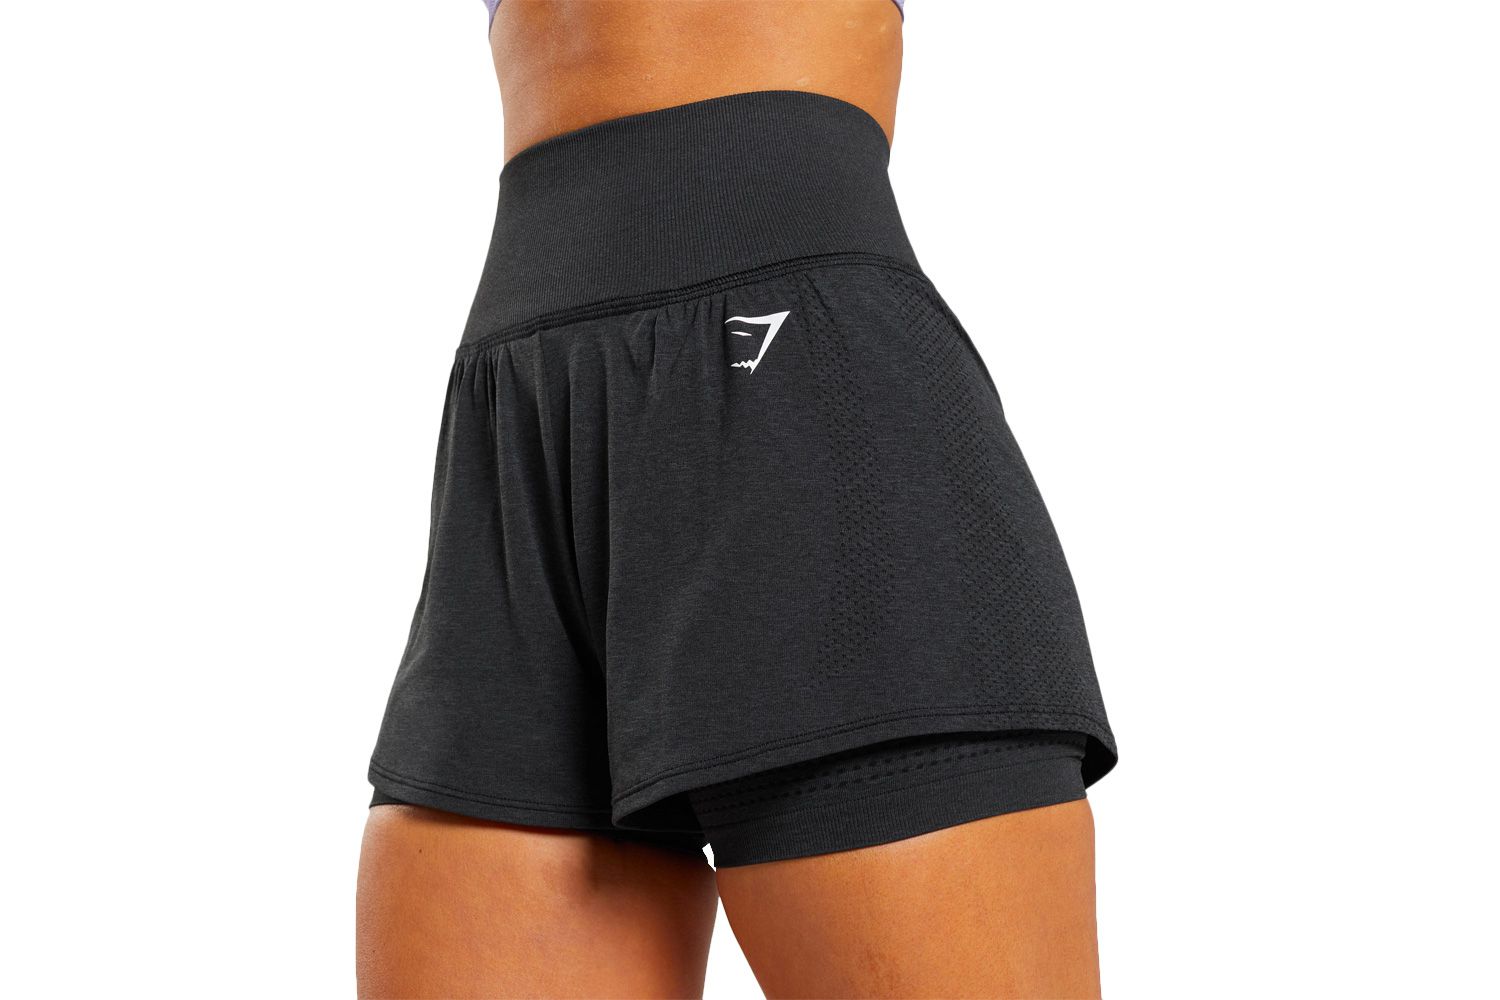 9 Best Girl Gym Shorts For 2023